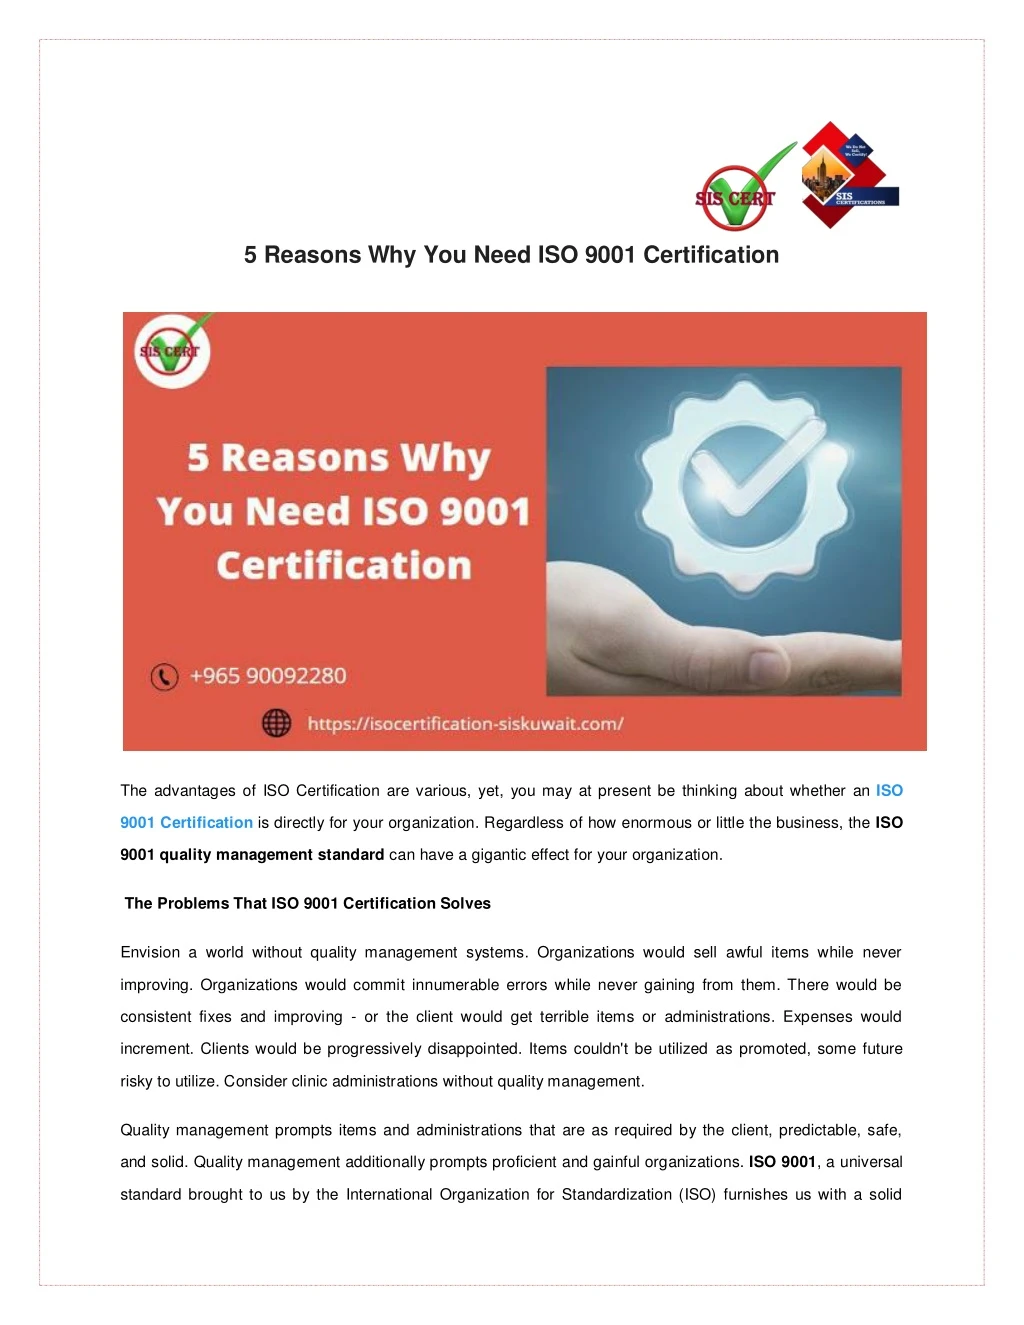 5 reasons why you need iso 9001 certification